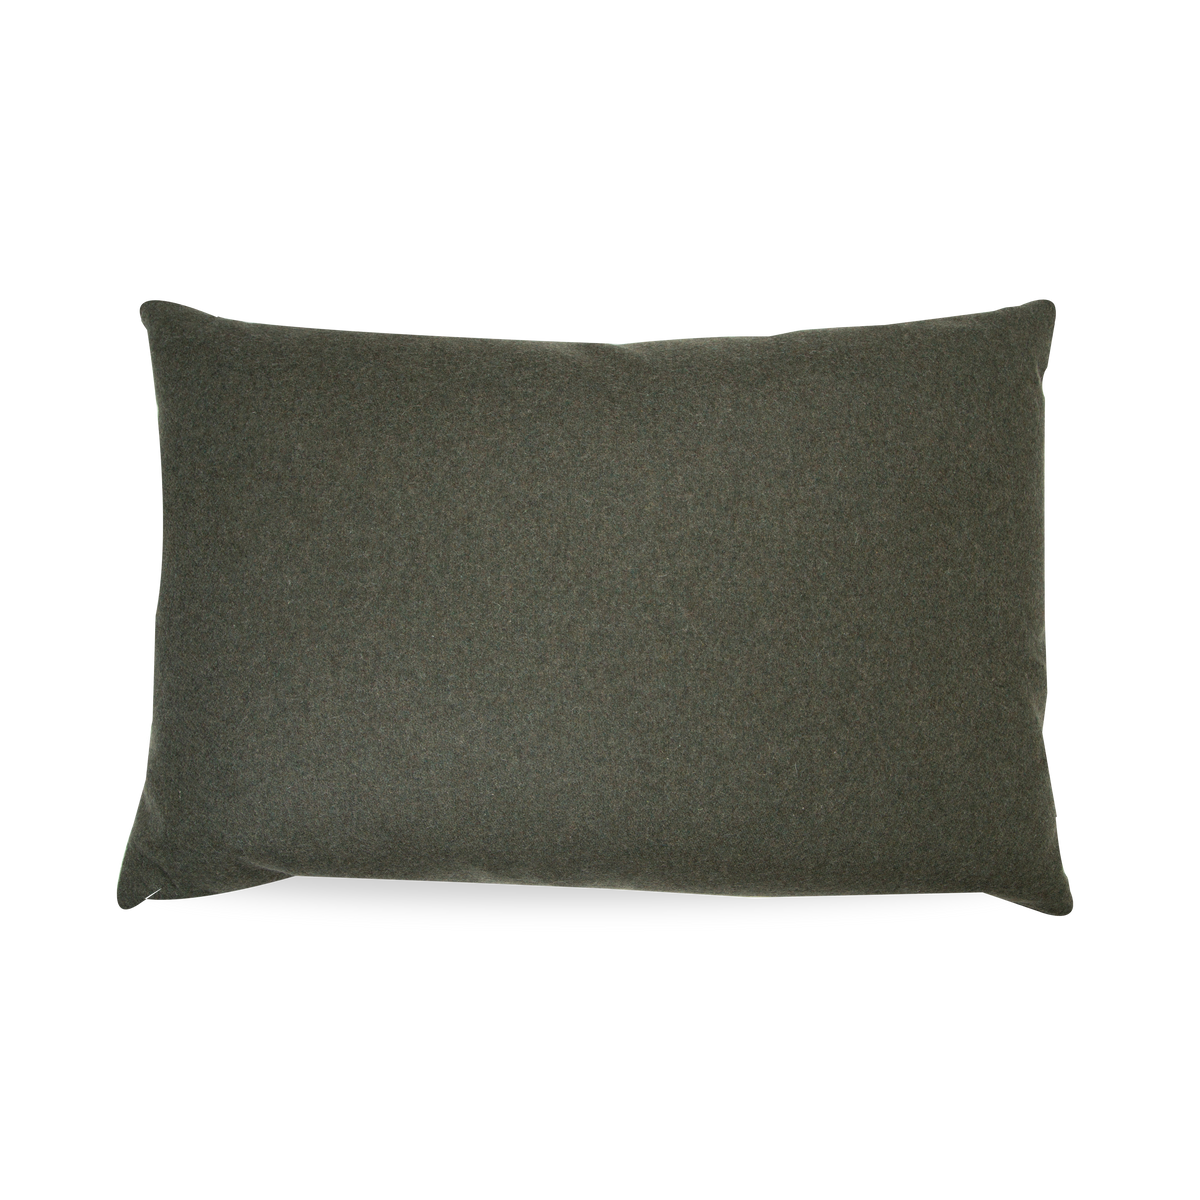 Woven with a high quality moss palette wool, the Ryan Wool Pillow adds a confidently luxurious composure and provides that atmosphere to any sofa or bed it resides on.